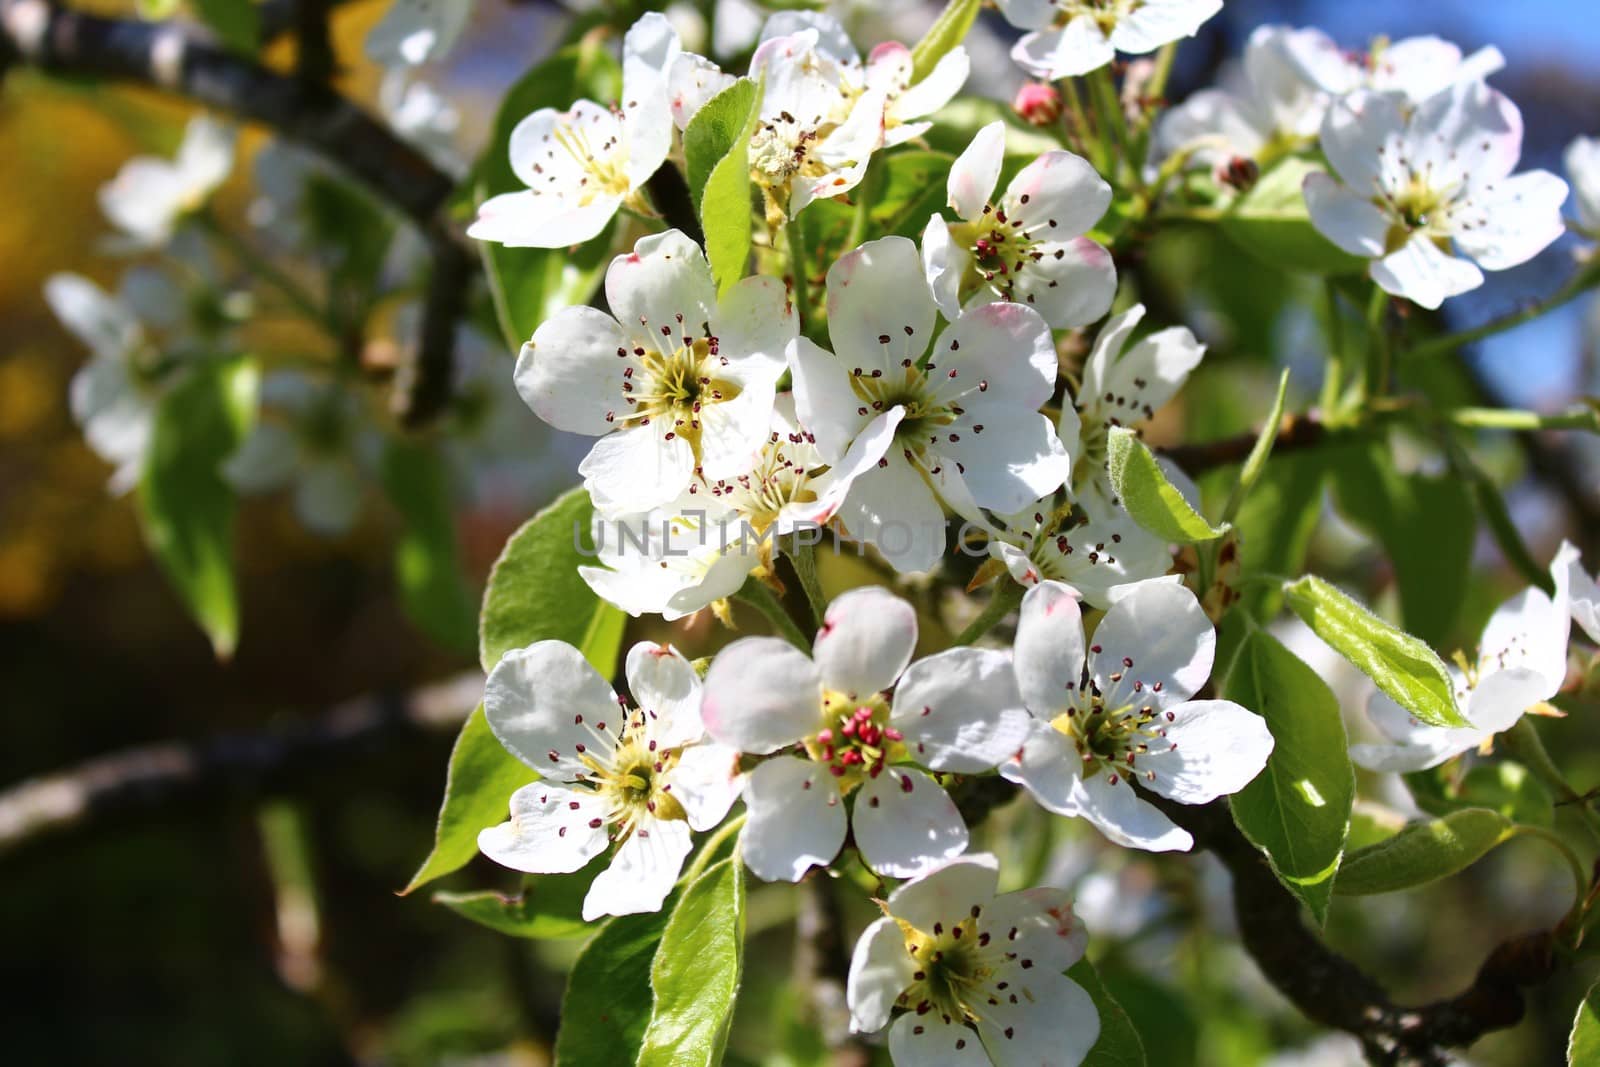 The pictureshows blossoms of a pear tree